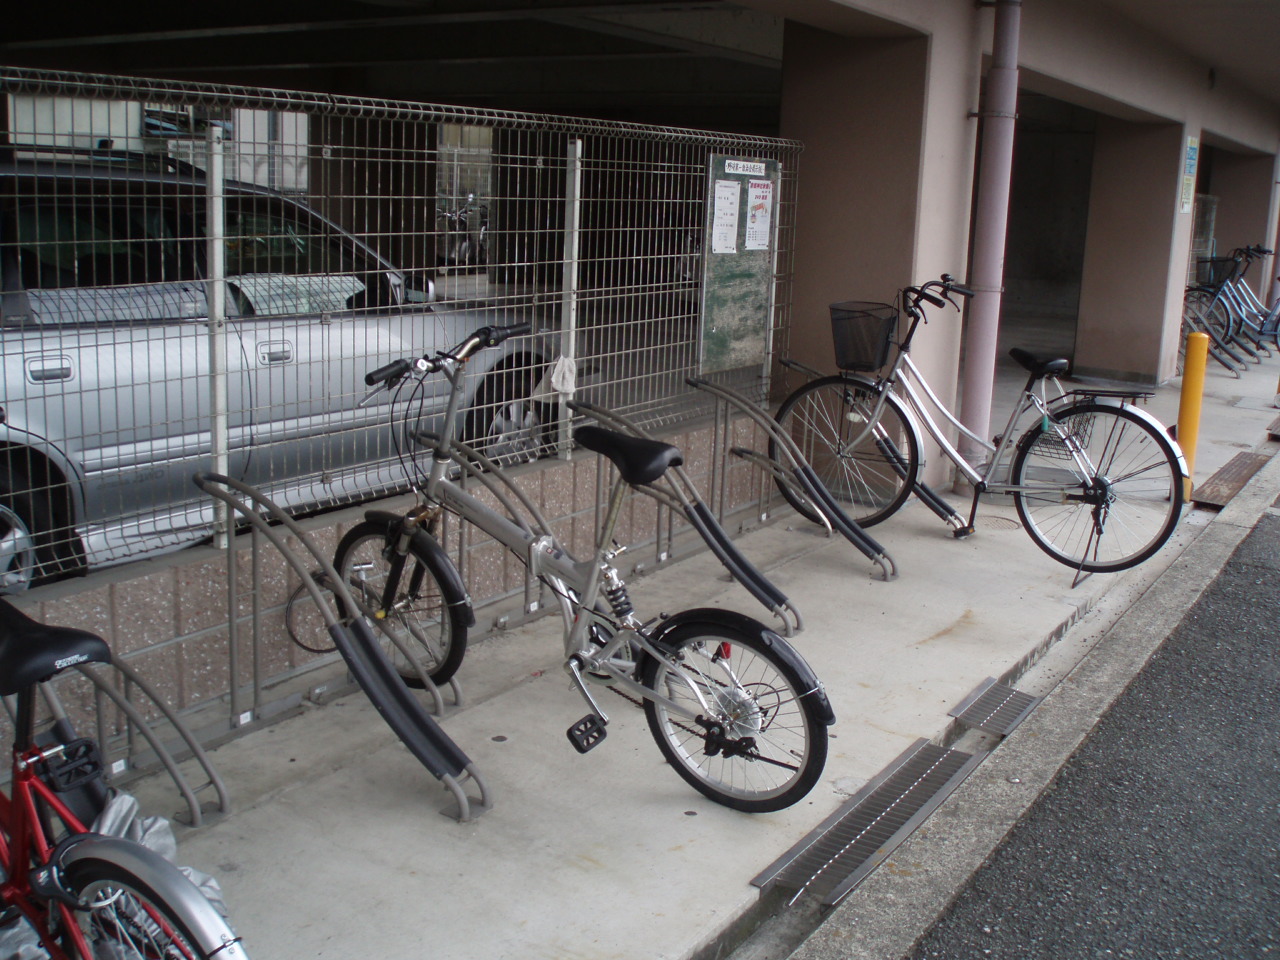 Other common areas. There is bicycle storage!